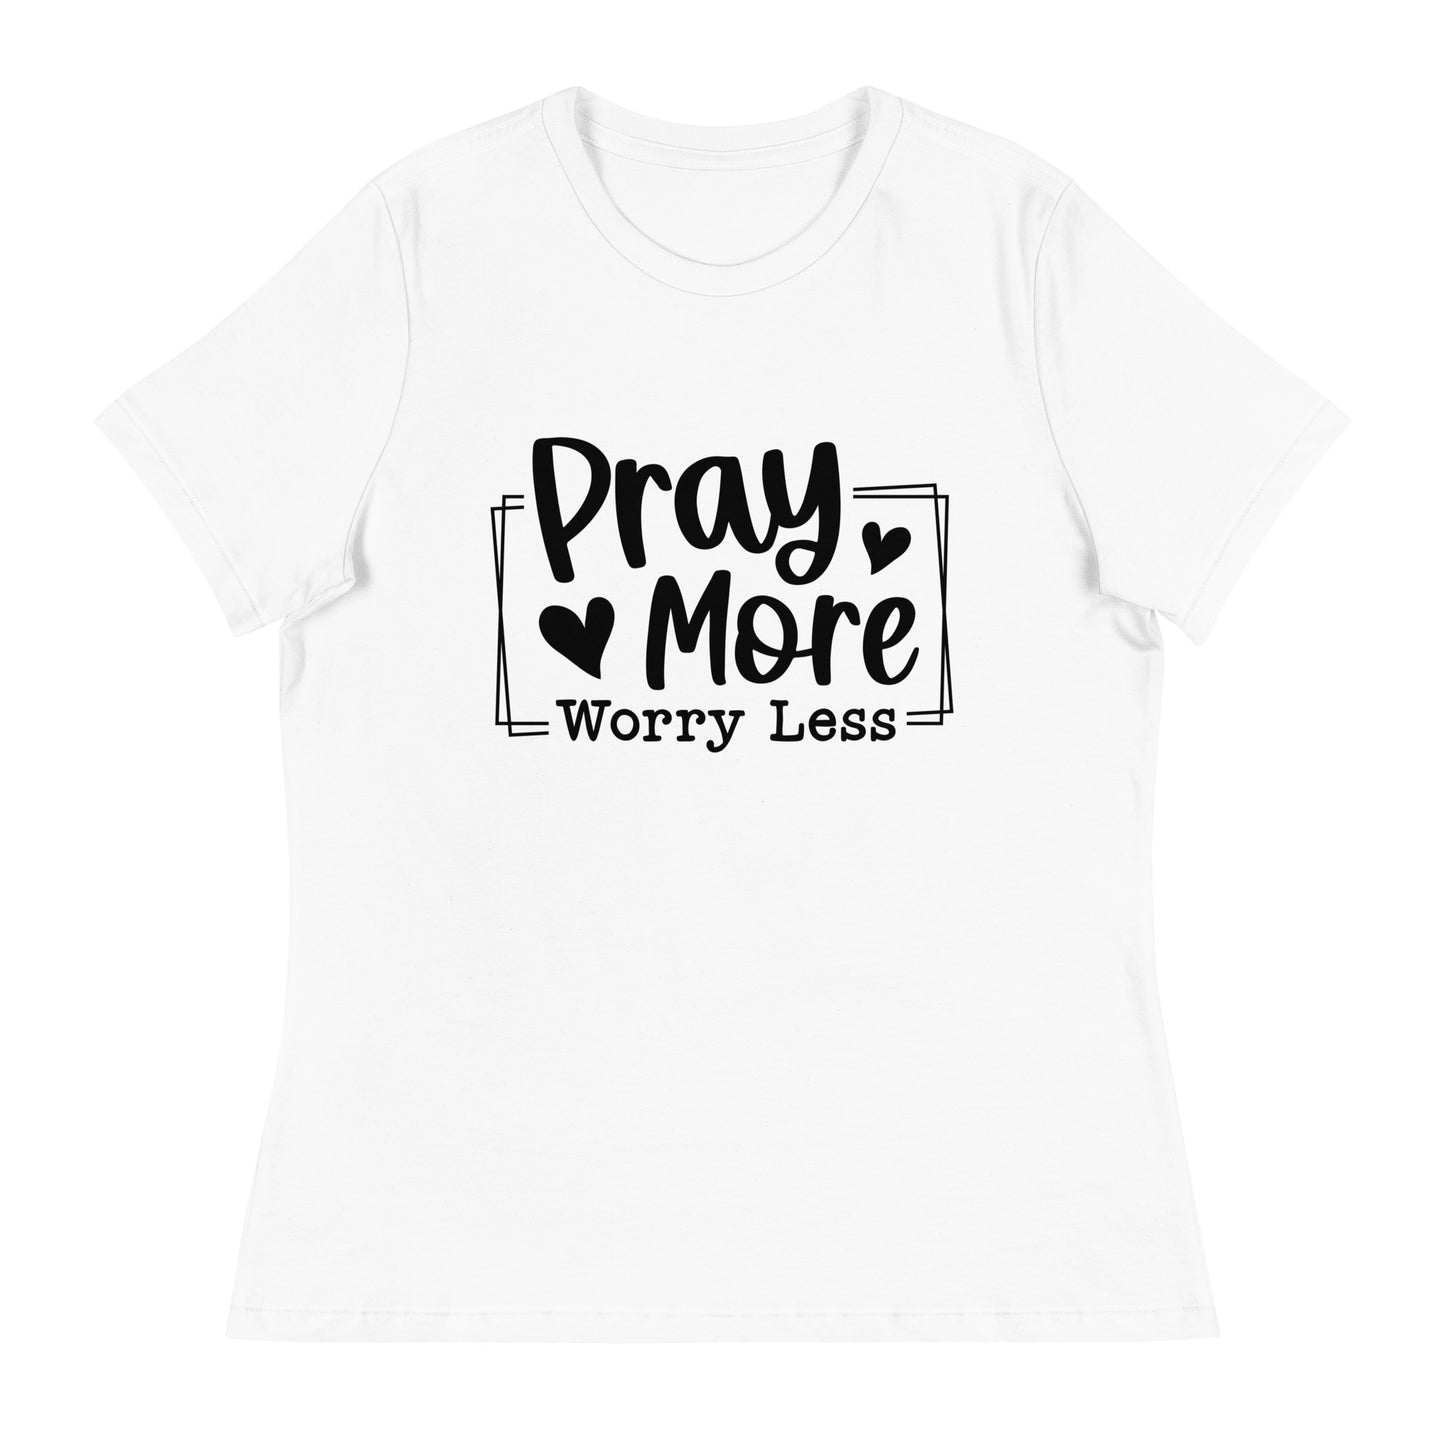 Pray More Worry Less White Women's Relaxed T-Shirt